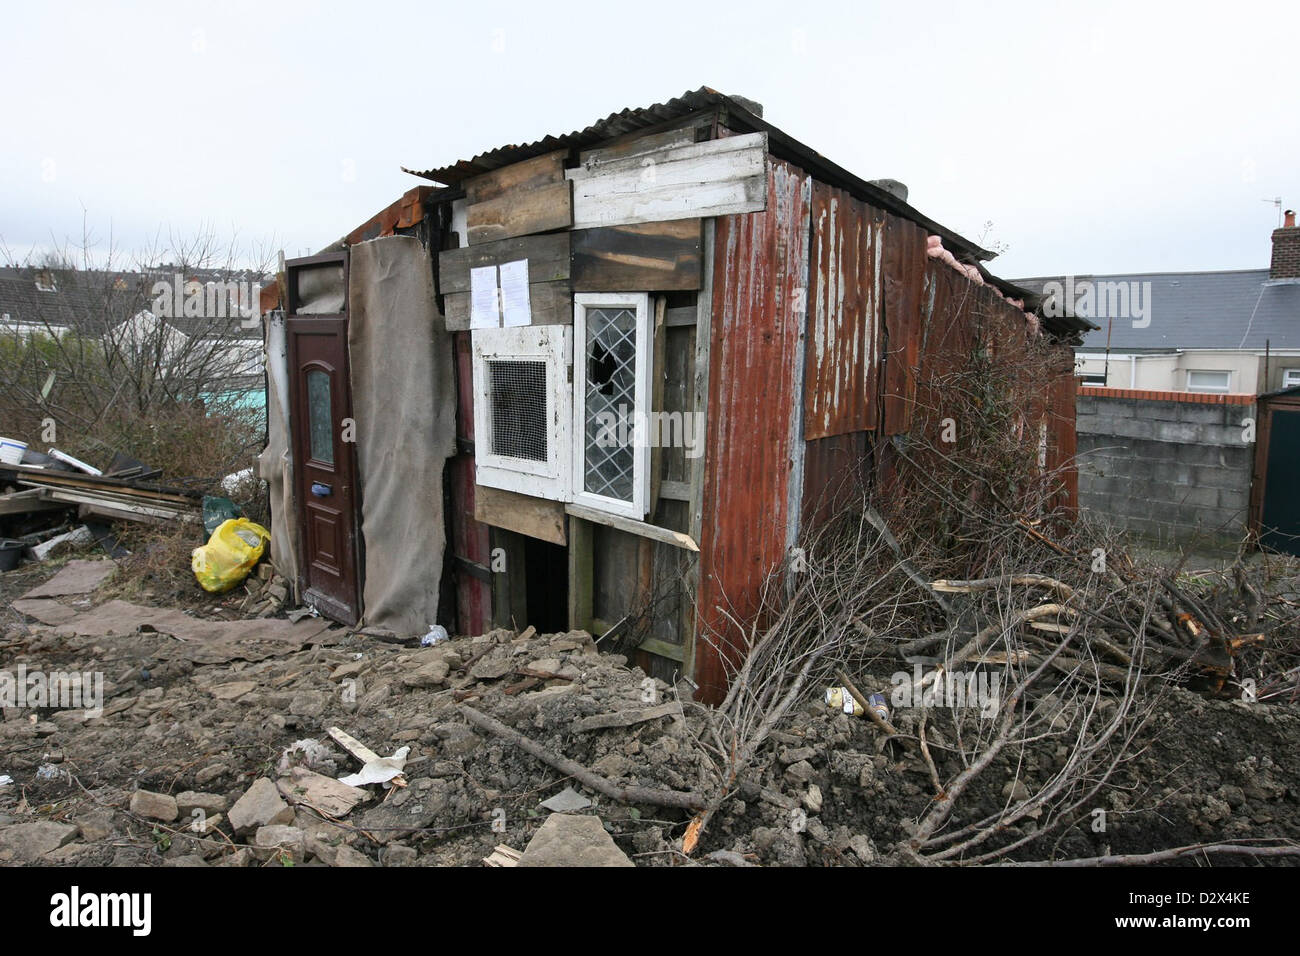 A shanty Town style dwelling in, Llanelli, Wales. The Shed ...